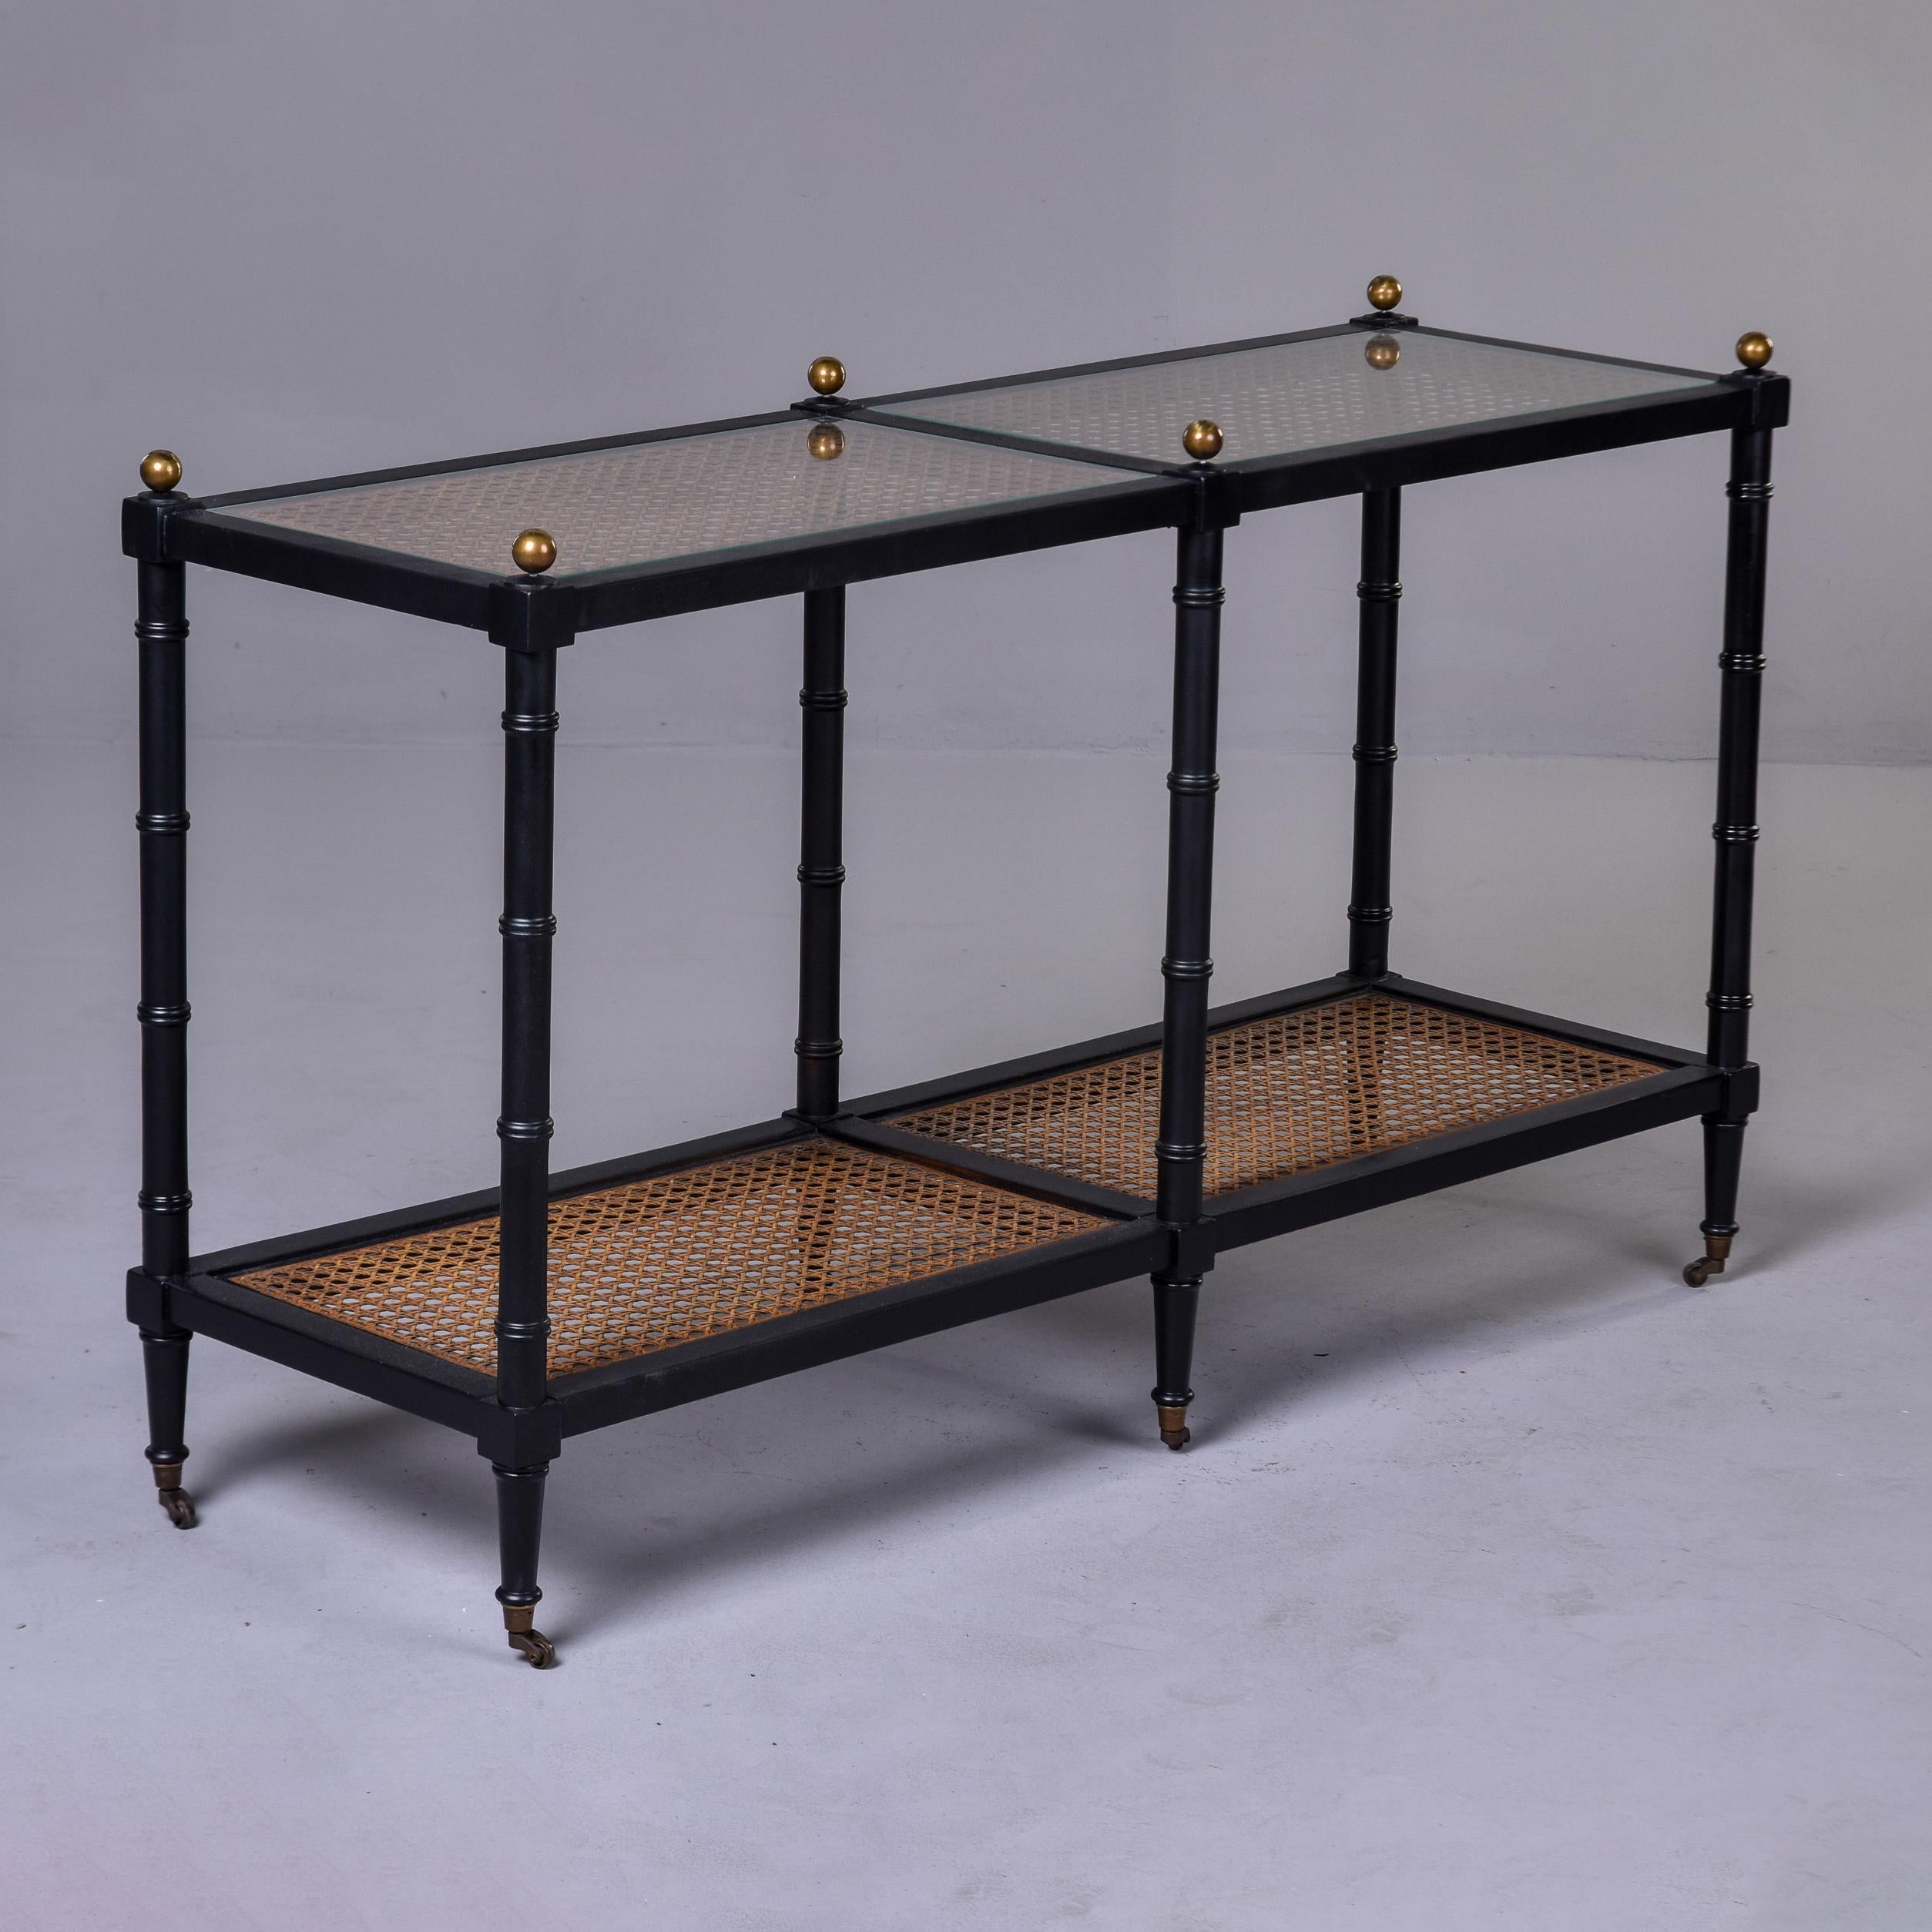 Found in the US, this circa 1960s console table has a faux bamboo frame with a painted black finish. The top and bottom shelves have caned surfaces with glass overlay panels on the top. Six legs with solid brass casters and round brass finials.